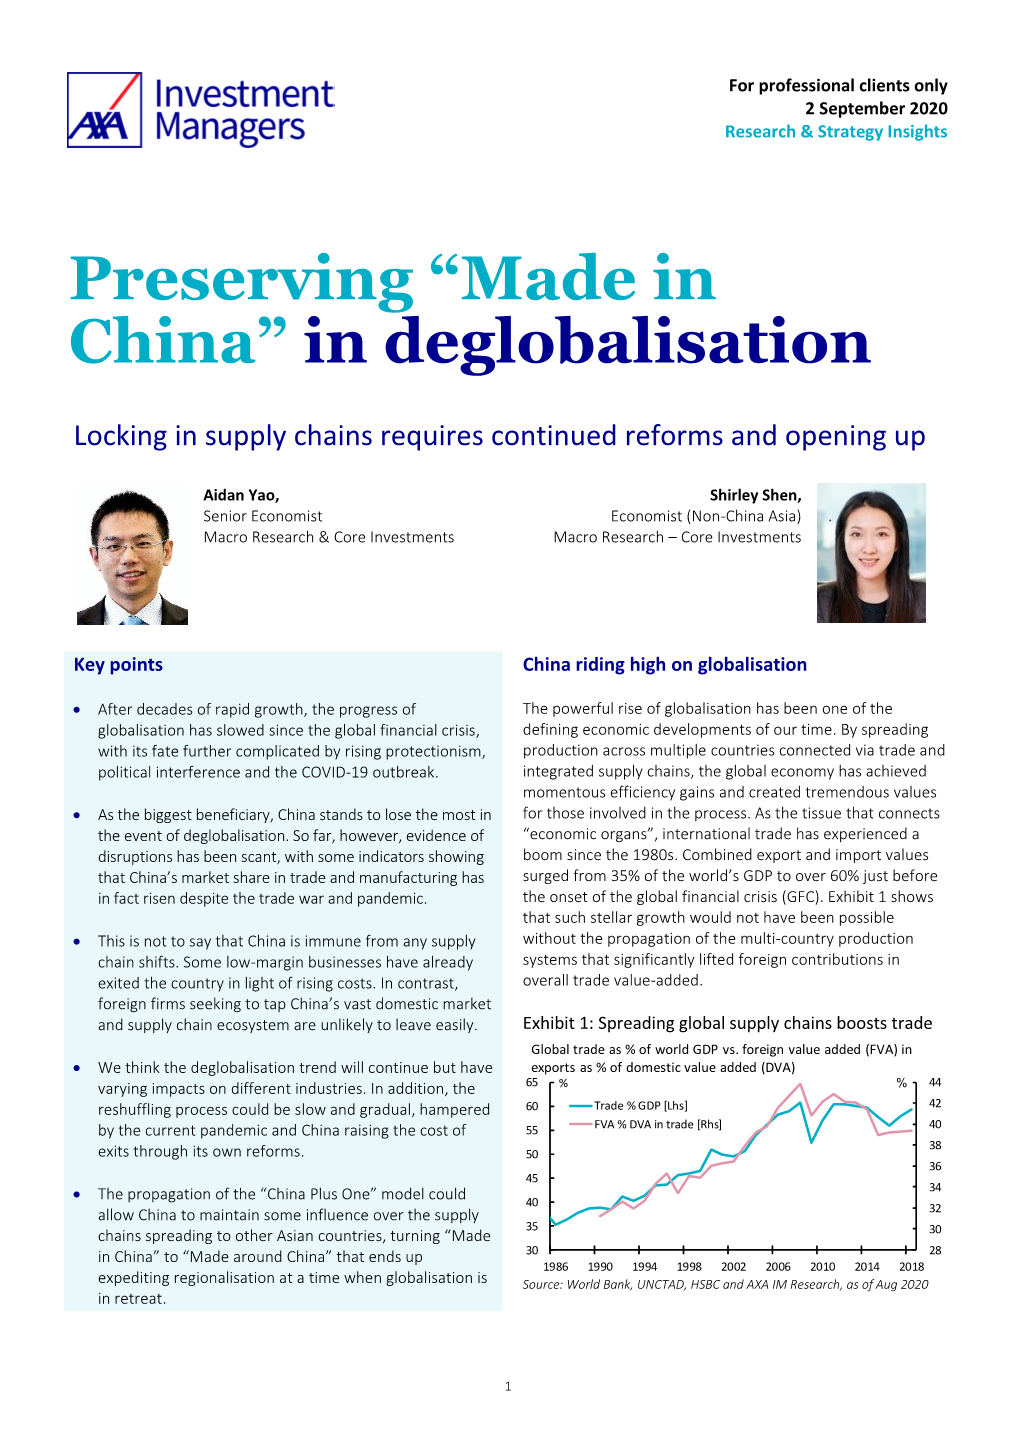 “Made in China” in Deglobalisation